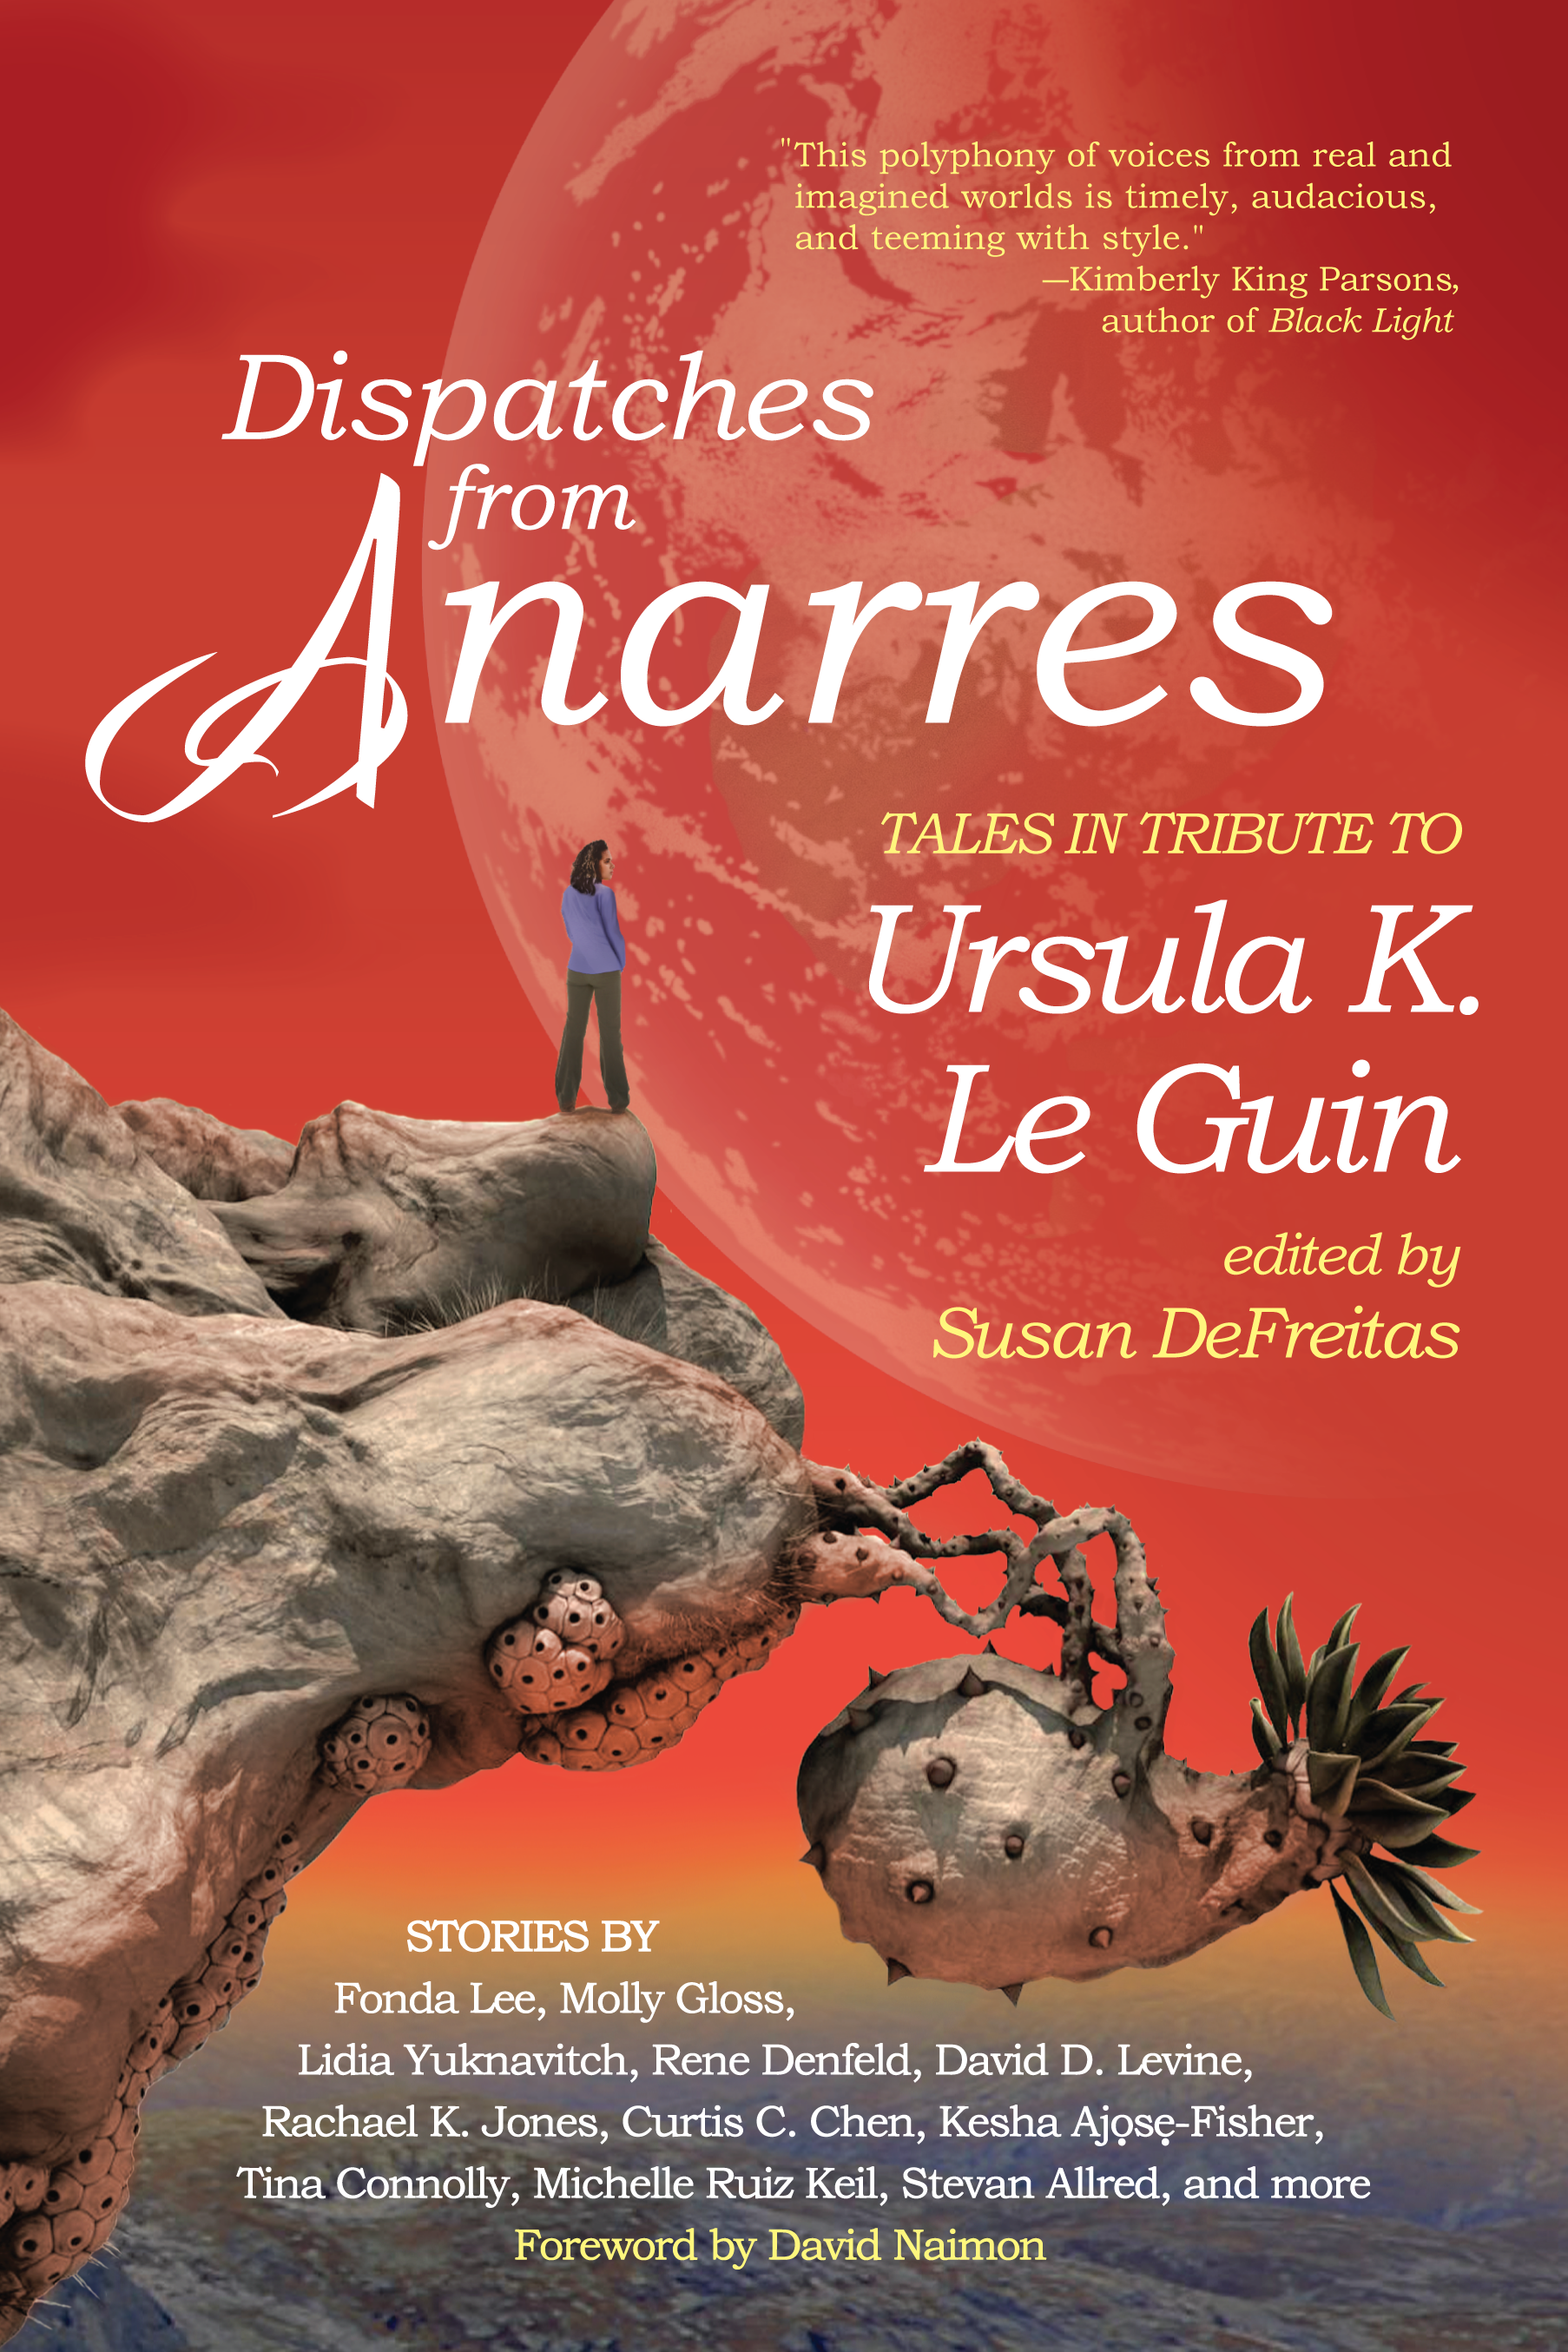 Dispatches from Anarres: Tales from Portland Authors in Tribute to Ursula K. Le Guin